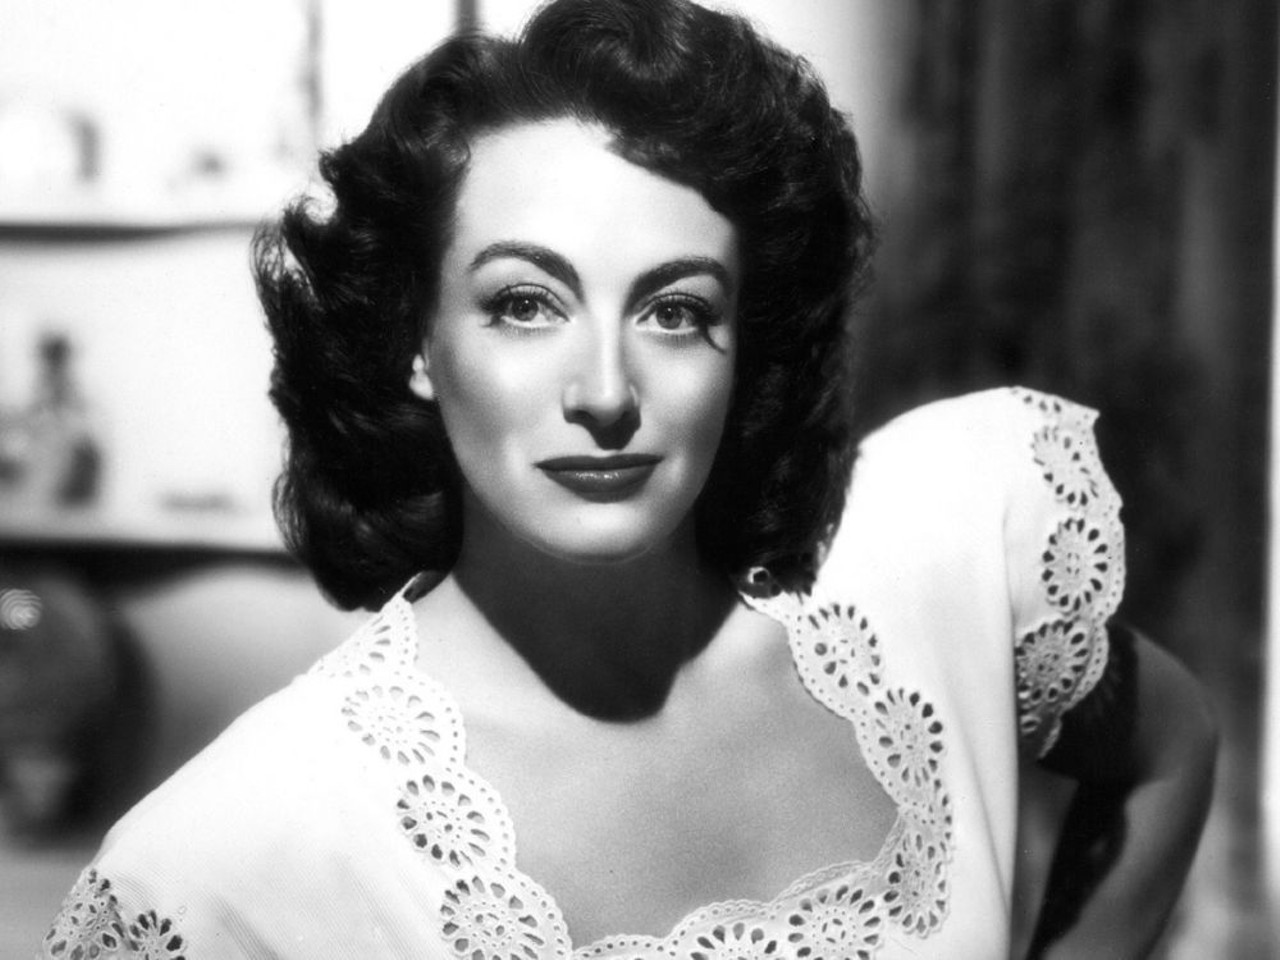 Joan Crawford
Actress Joan Crawford, known for her roles in films like What Ever Happened to Baby Jane? and Mildred Pierce, was born in San Antonio at the turn of the 20th century. The Academy Award winner attained a level of infamy in the wake of her adoptive daughter Christina Crawford’s 1978 autobiography Mommie Dearest, which alleged that Joan — who had passed in 1977 — was abusive and an alcoholic. In 1981, the book was adapted into a film of the same name starring Faye Dunaway.